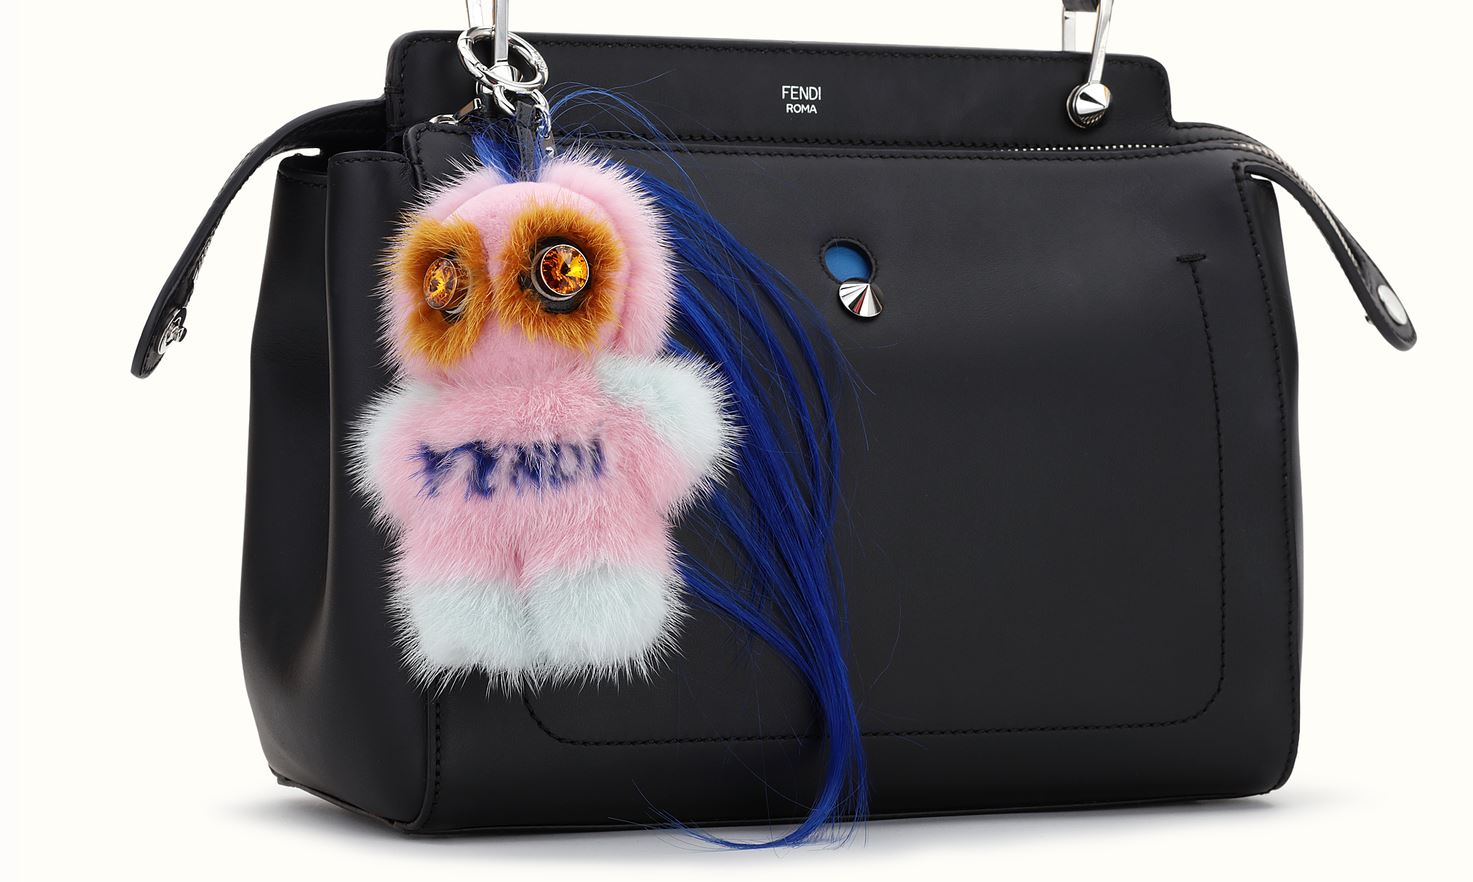 World Gone Mad: People Pay $1,500 For Furry Purse Pets - Bloomberg